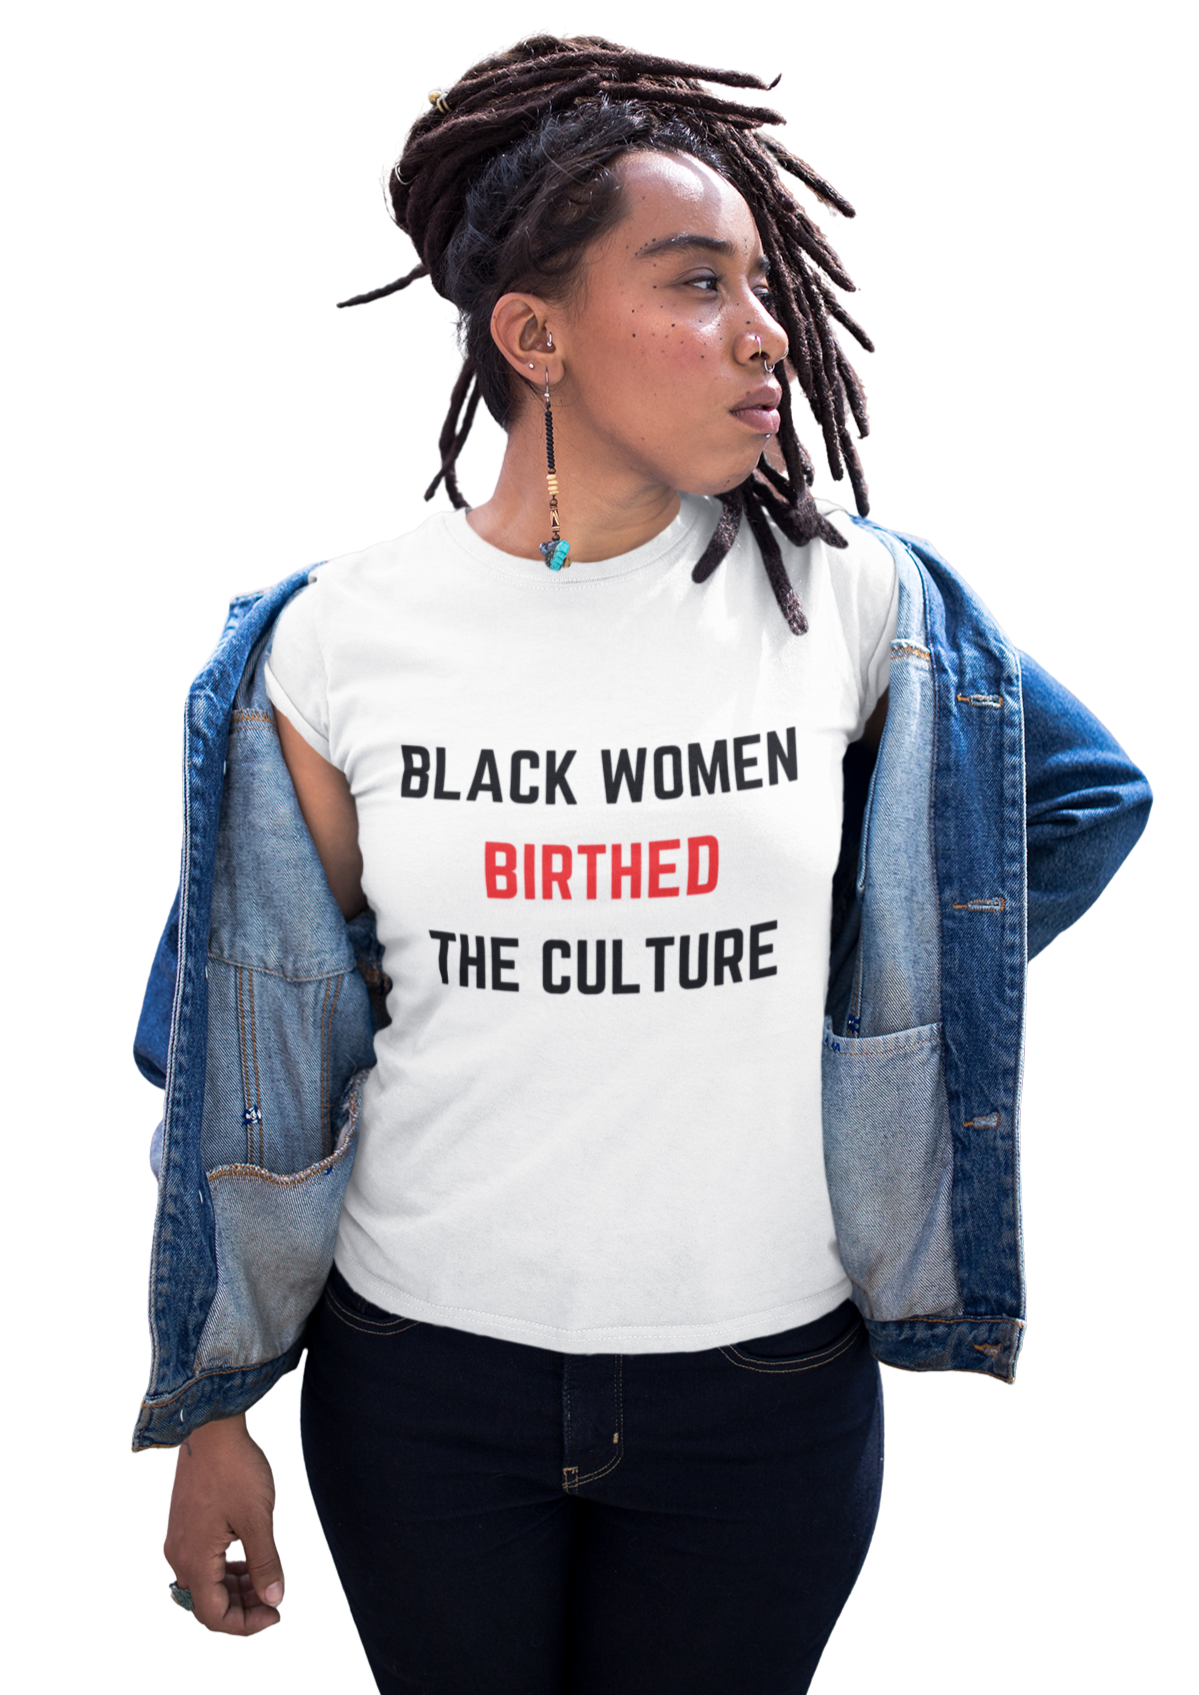 Women's "Black Women Birthed The Culture" T-Shirts